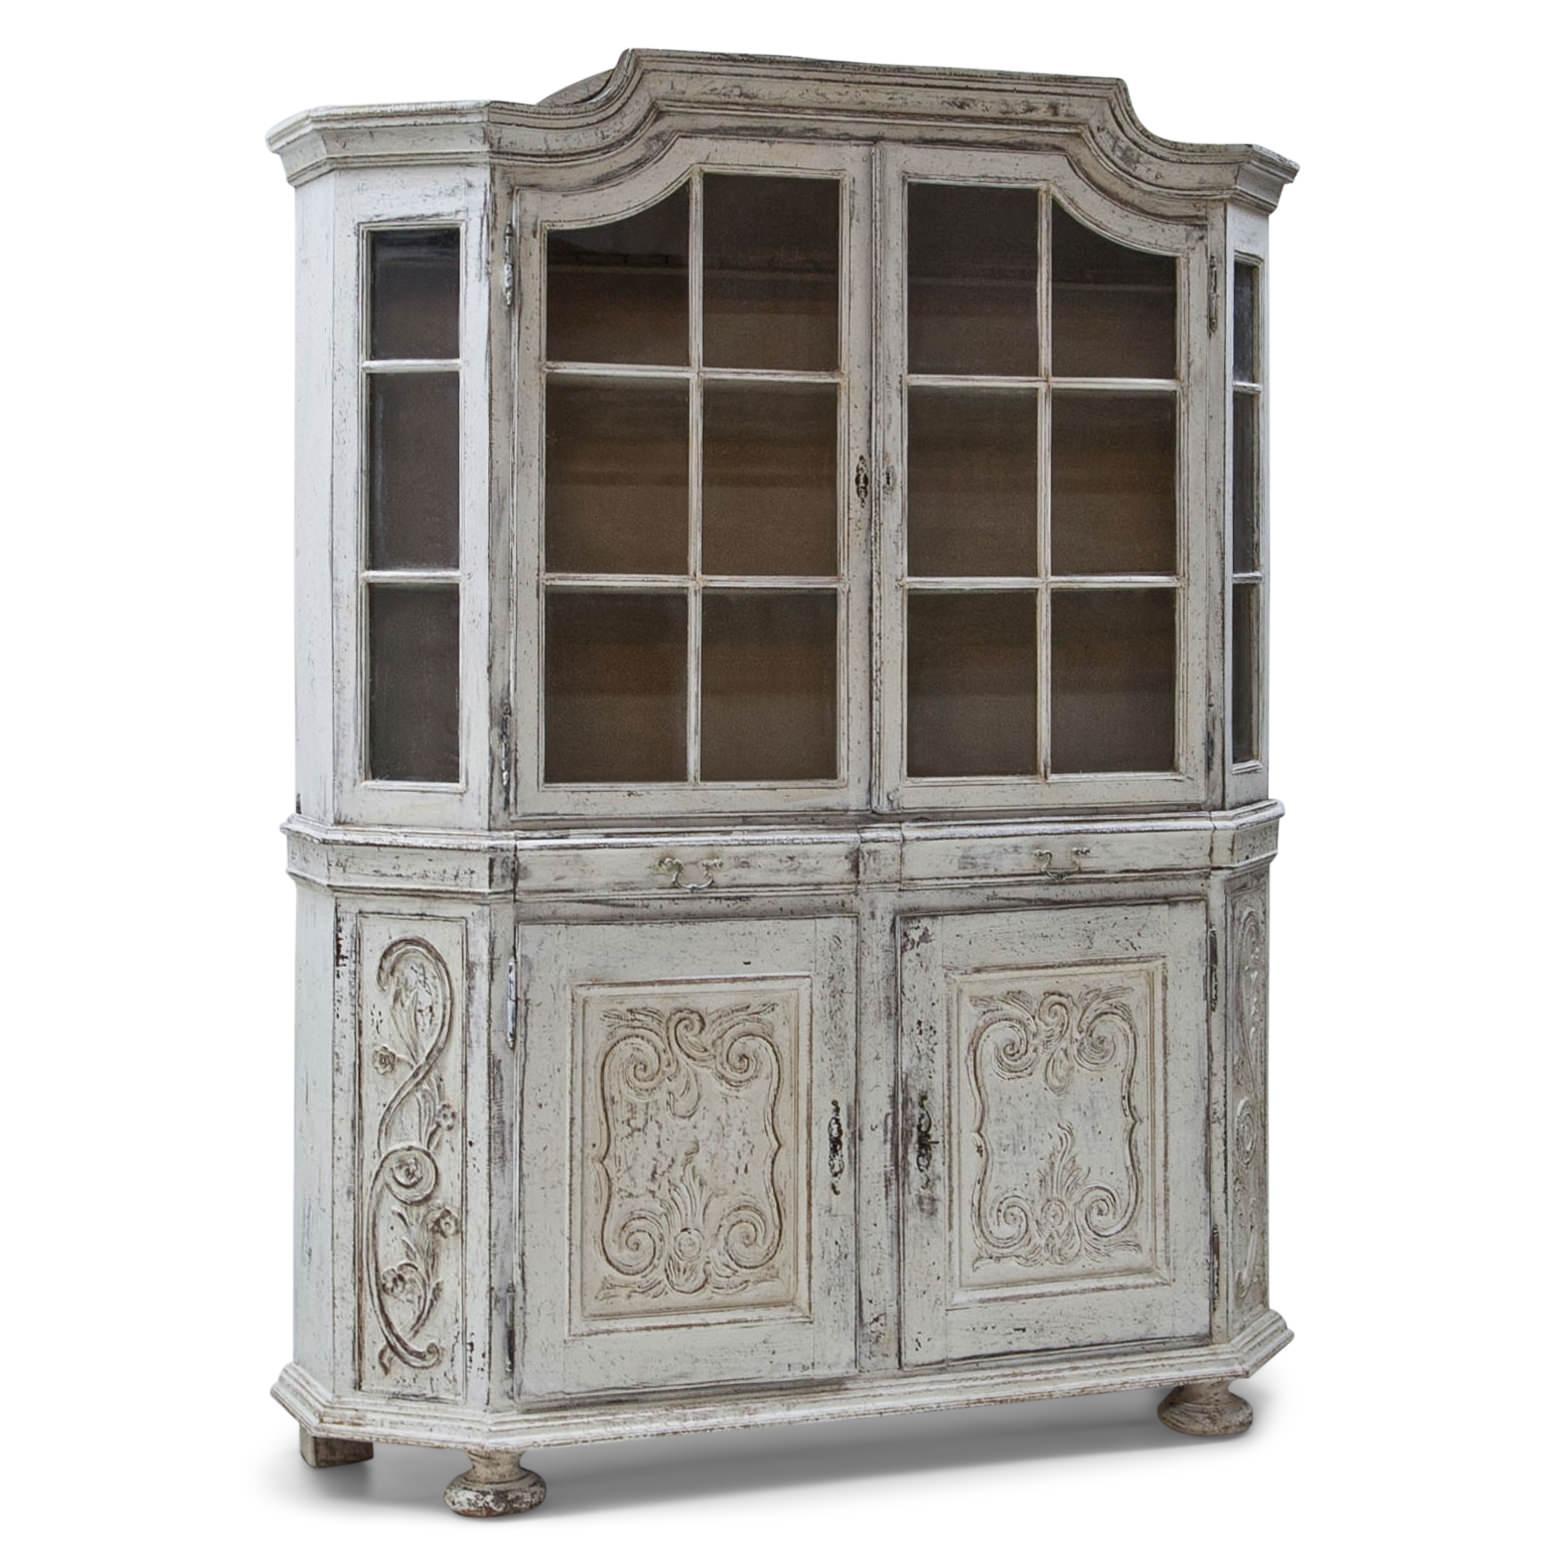 Large display cabinet with a two-door cabinet base, two drawers and a display case top part with two doors and strutted windows. The cornice slightly rises towards the middle and the corners of the cabinet are slanted. The white paintjob is new and